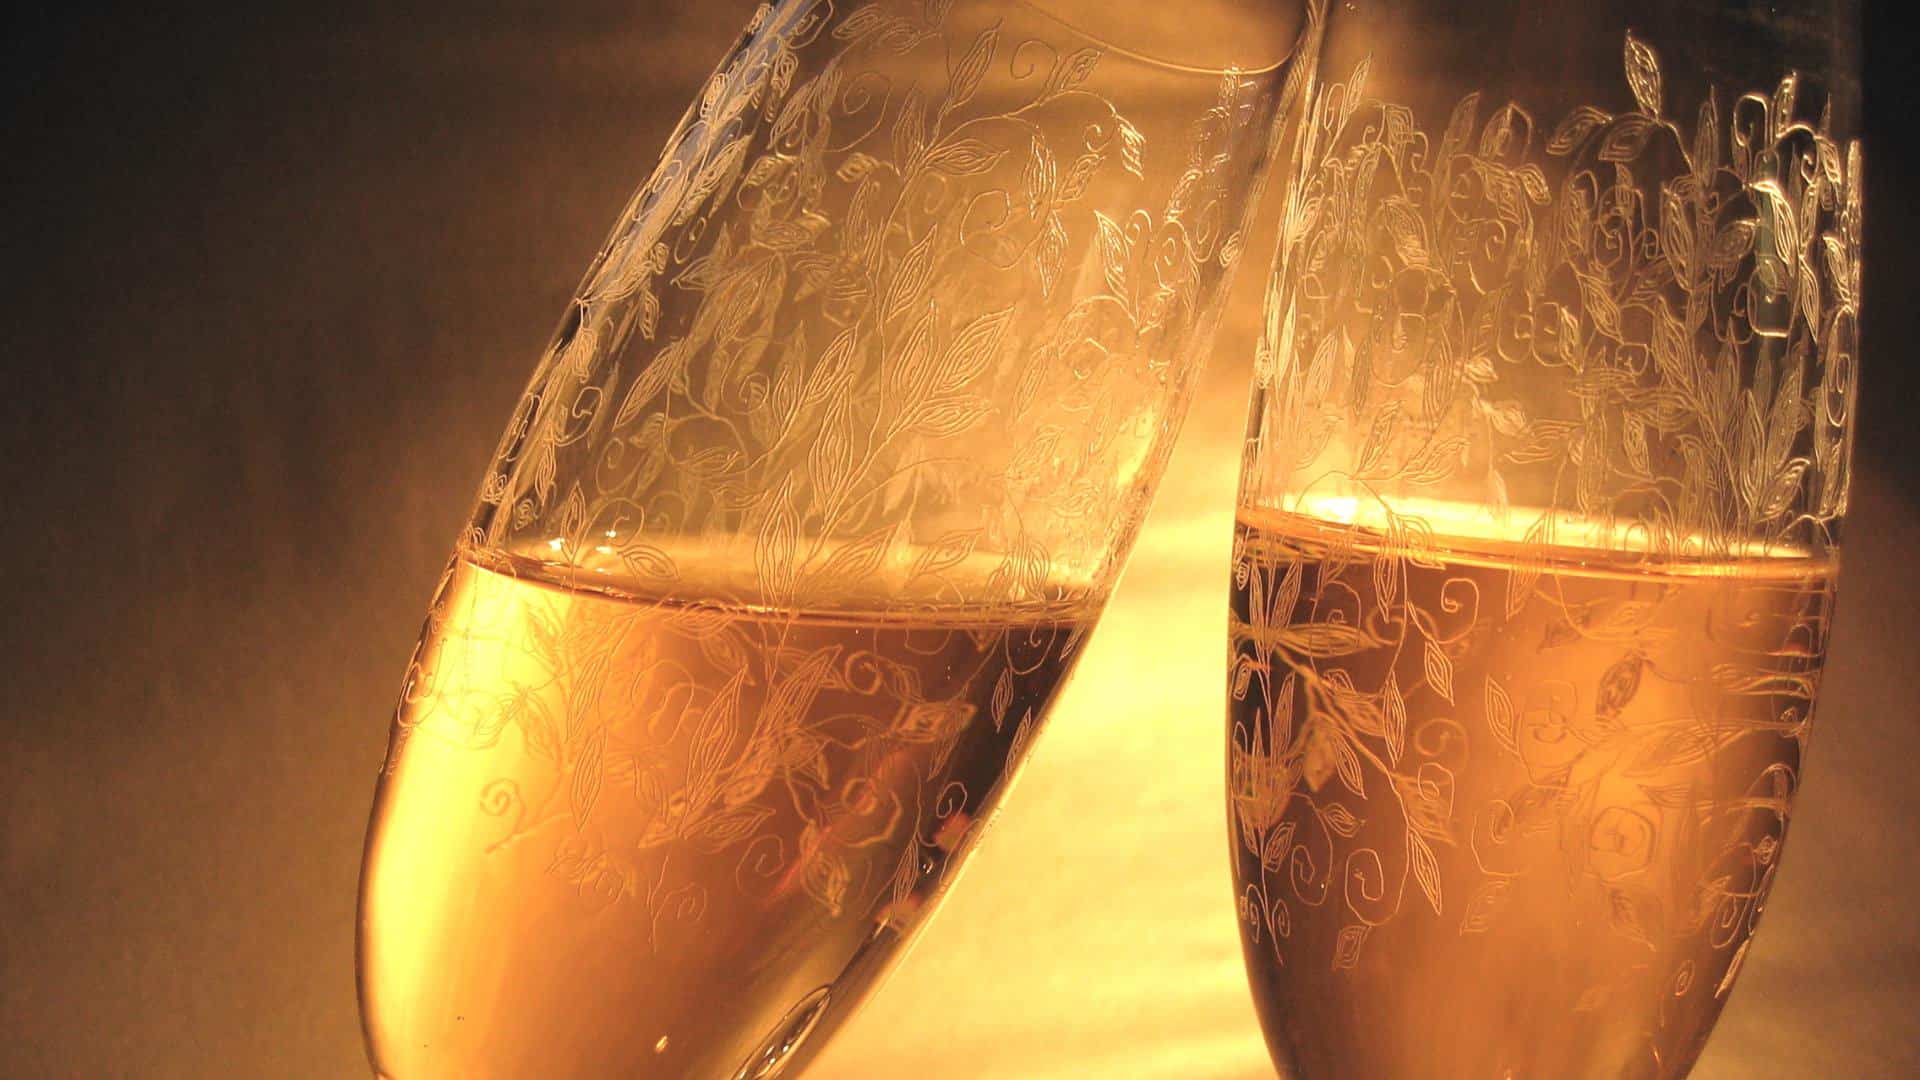 Close up view of two glasses filled with Champagne